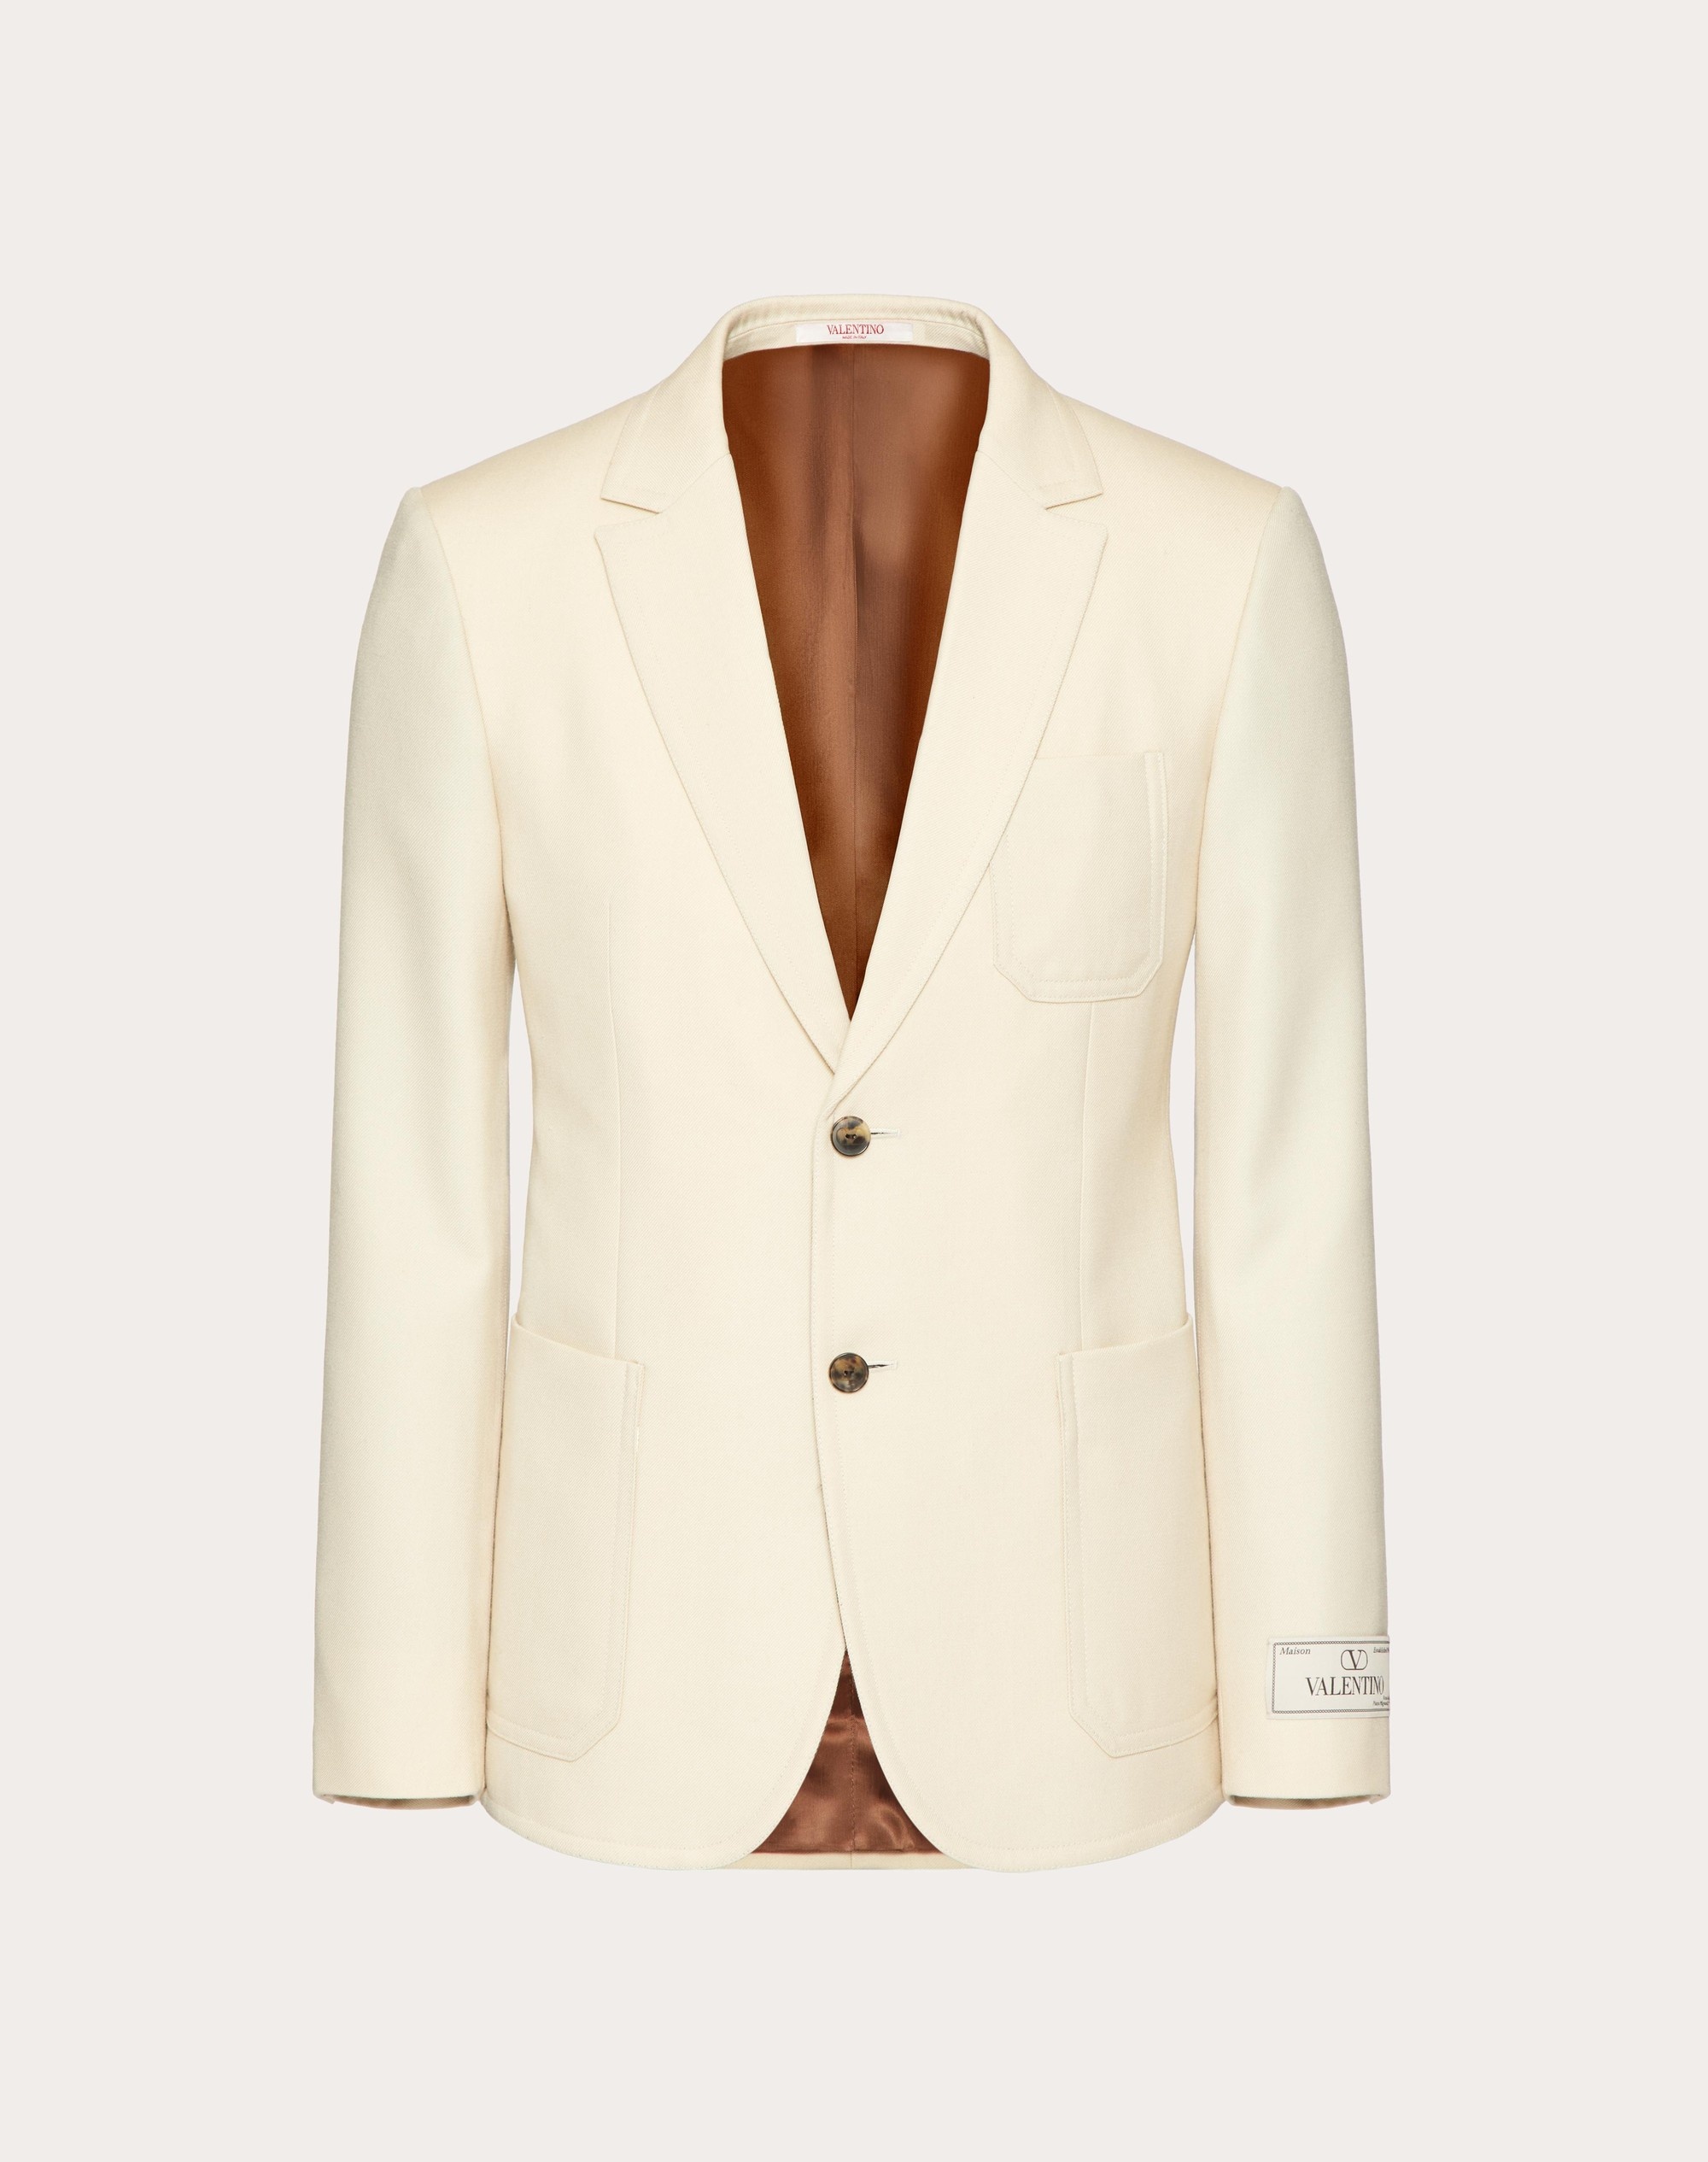 SINGLE-BREASTED WOOL JACKET WITH MAISON VALENTINO TAILORING LABEL - 1